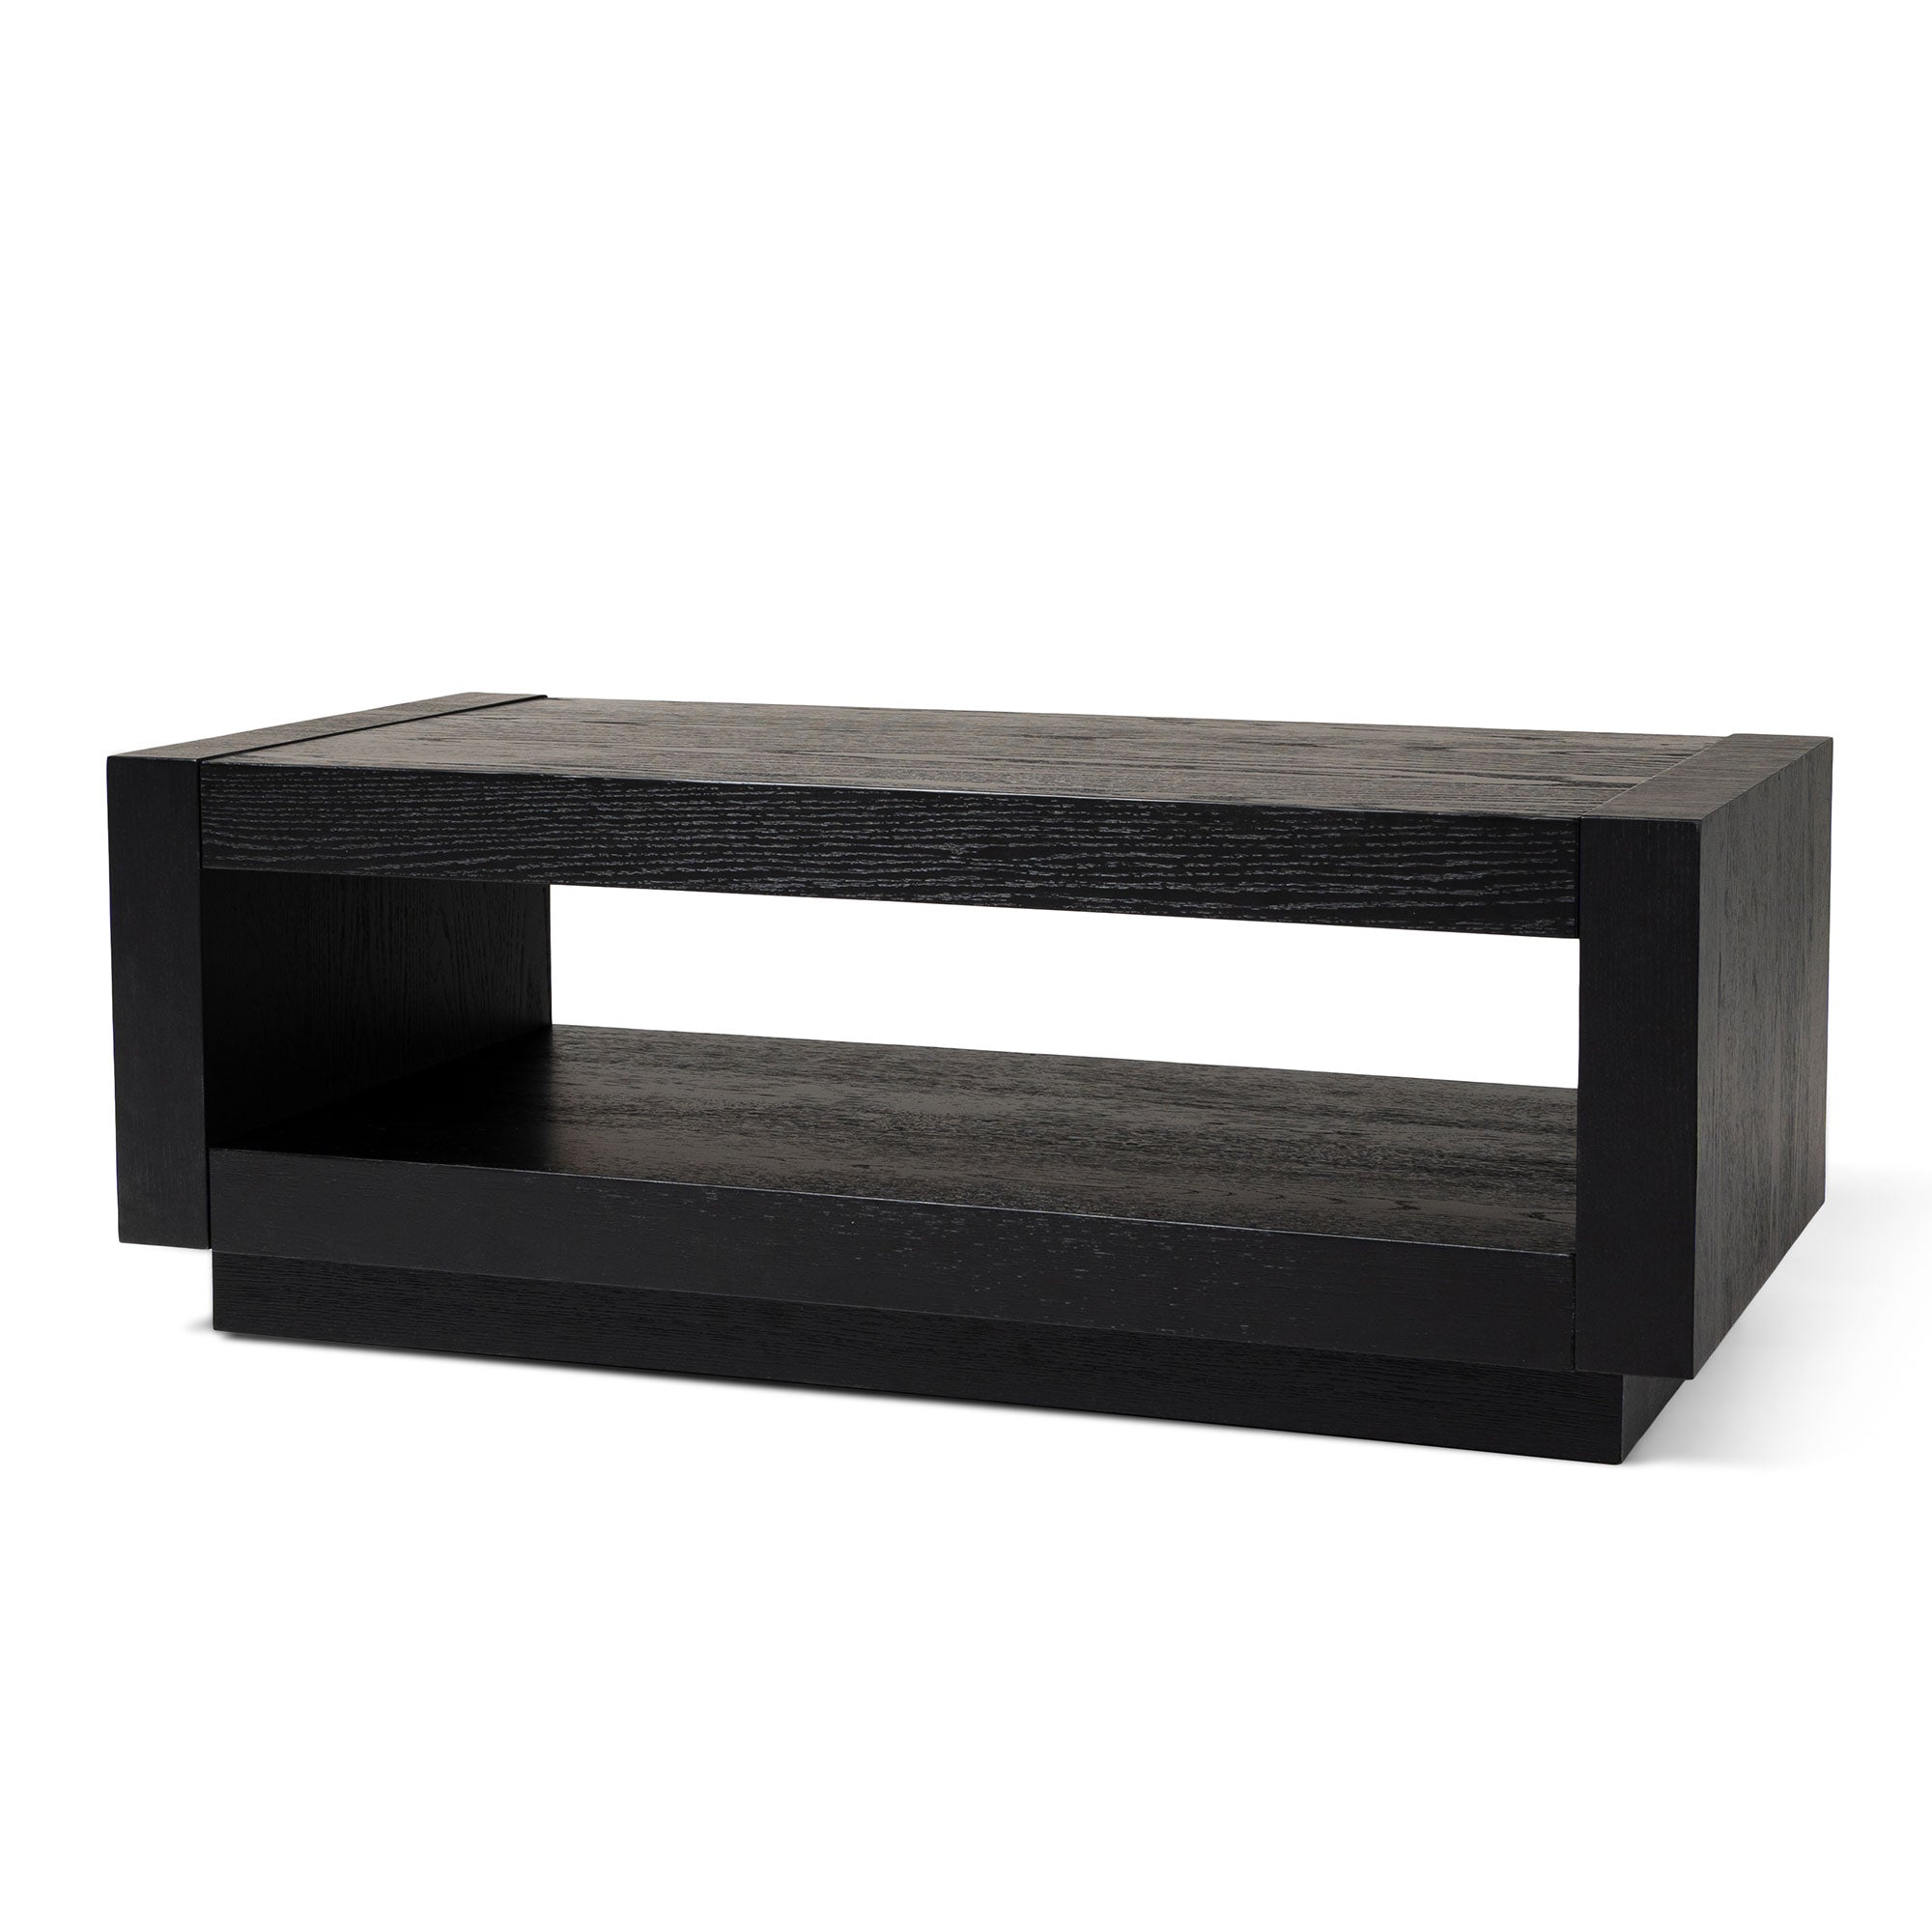 Artemis Contemporary Wooden Coffee Table in Refined Black Finish in Accent Tables by Maven Lane